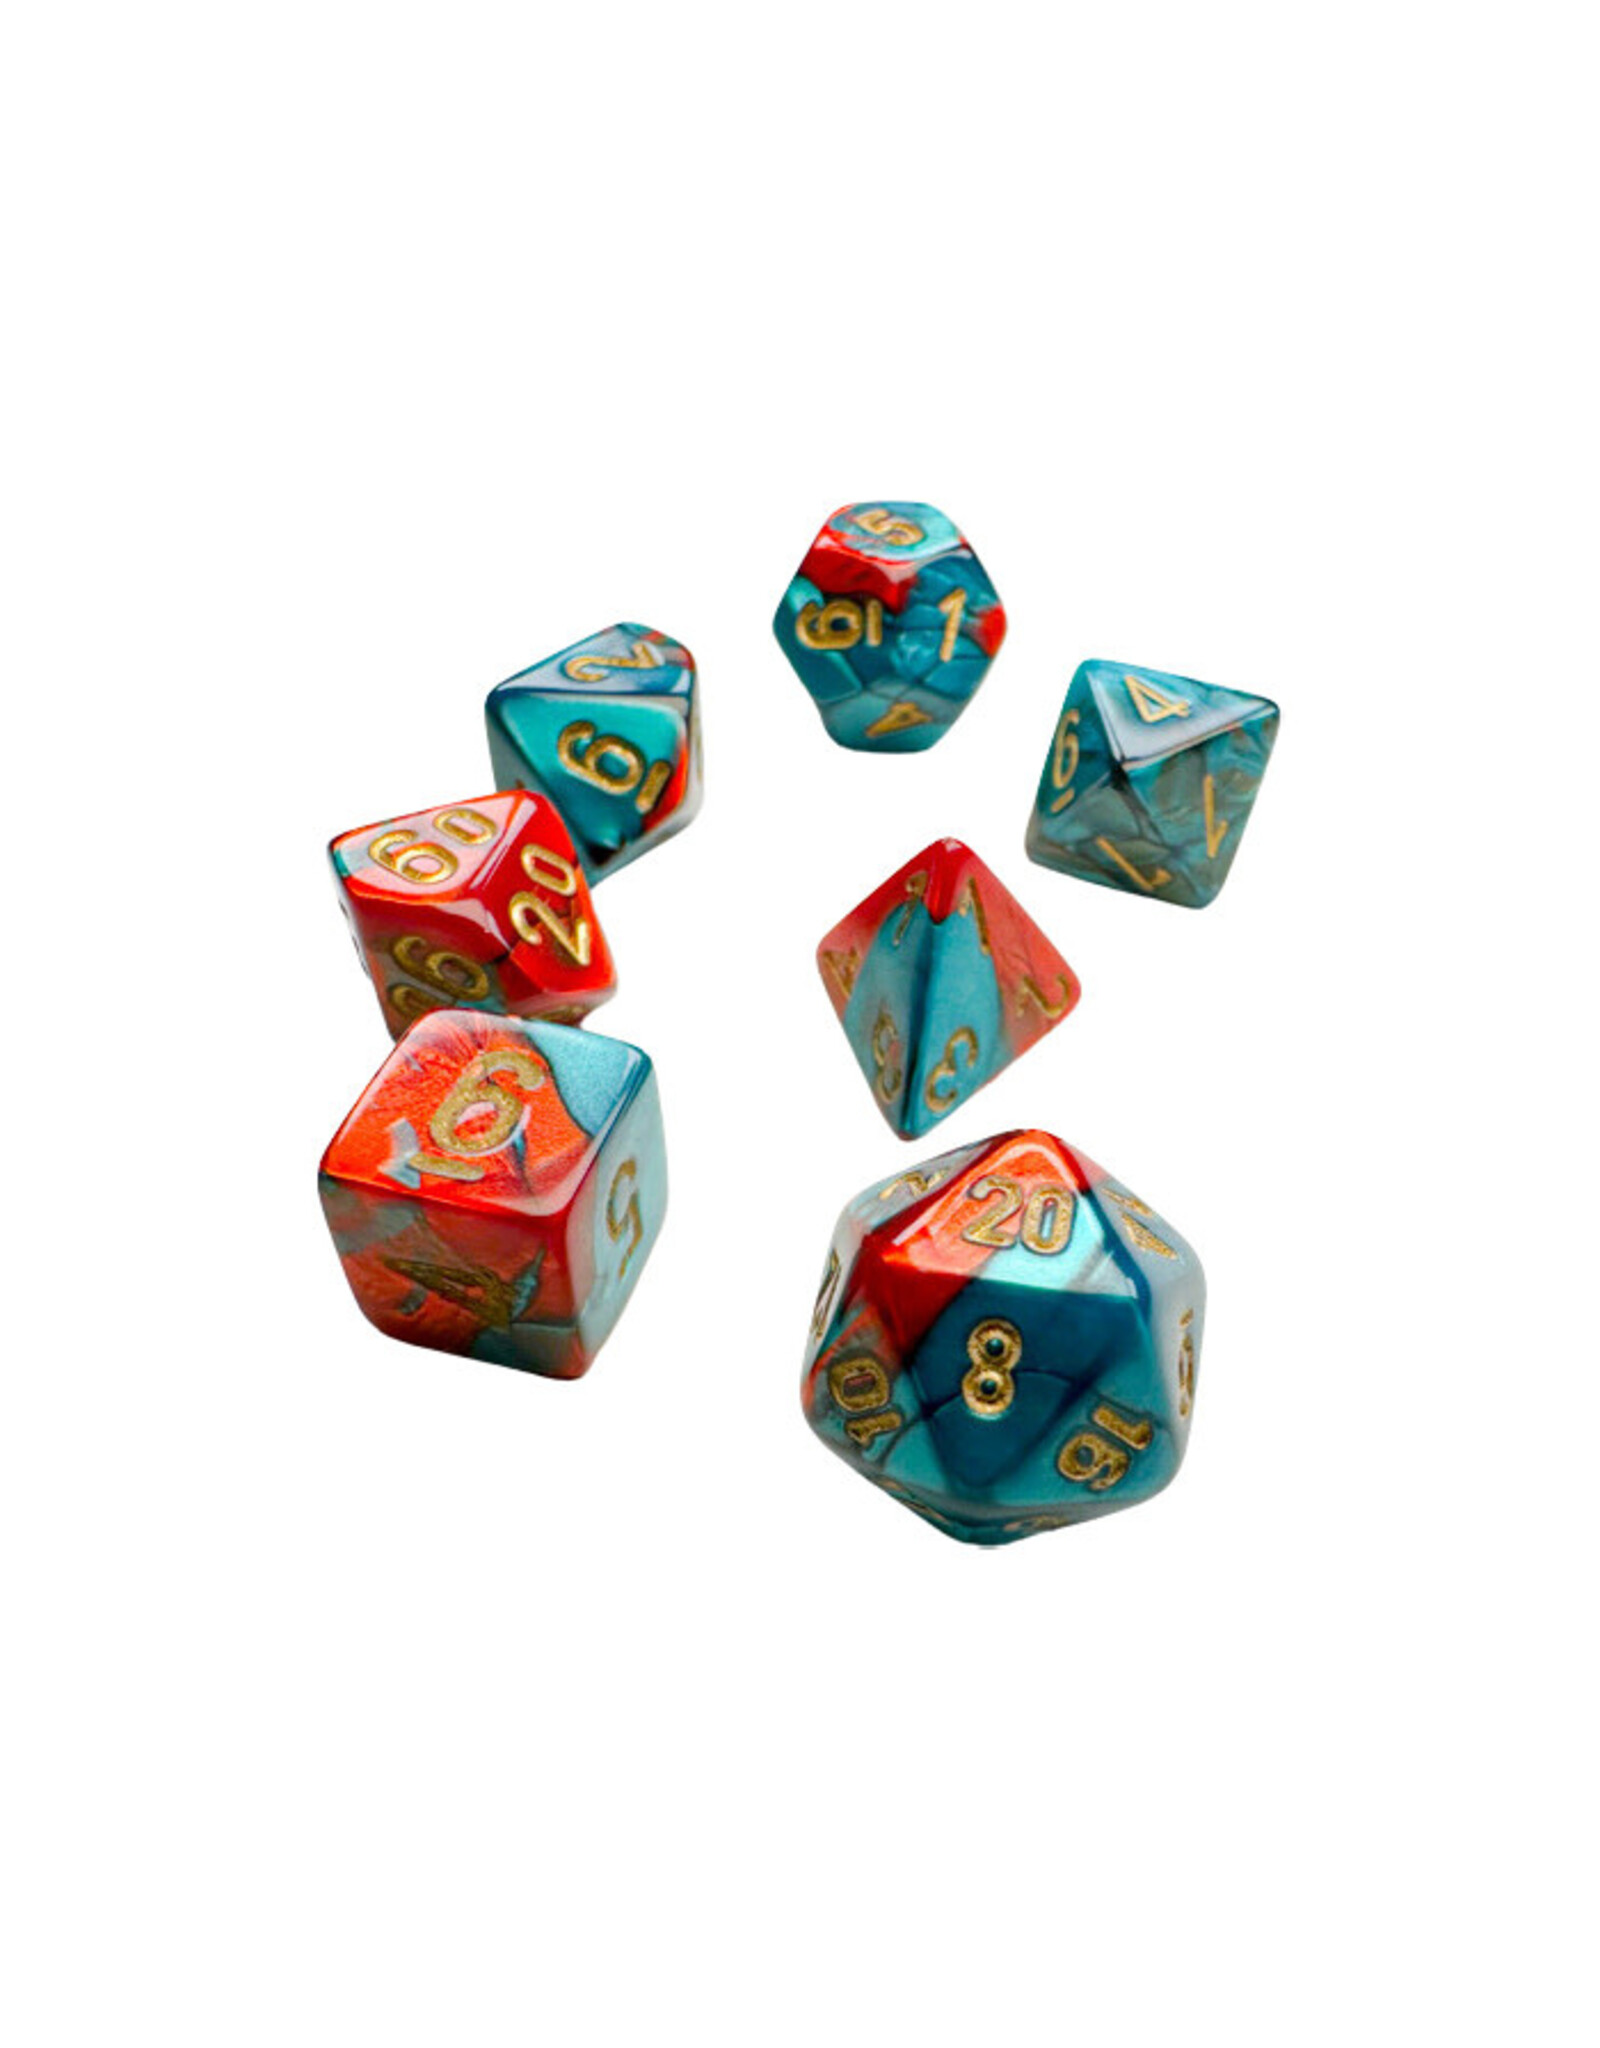 Chessex Mini Gemini Red Teal with Gold poly 7 dice set